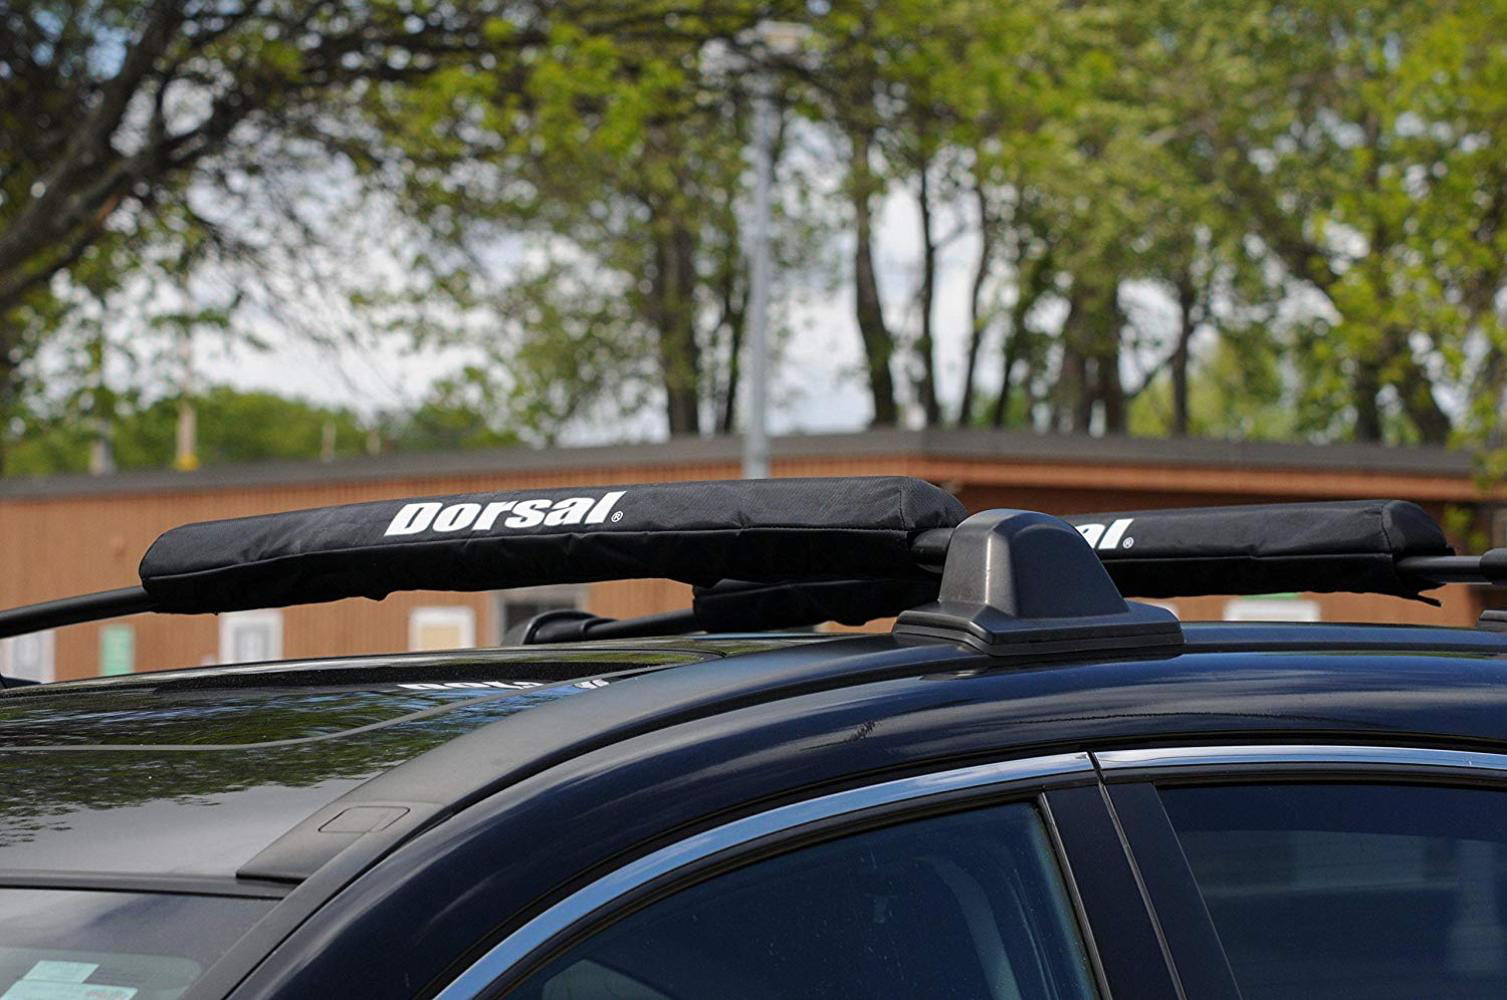 COR Surf Roof Rack Pads/Snowboard Rack for Surfboard Kayak SUP Snowboard | for Large Aero Bars Pair Small 19 Camo 28 & 19 